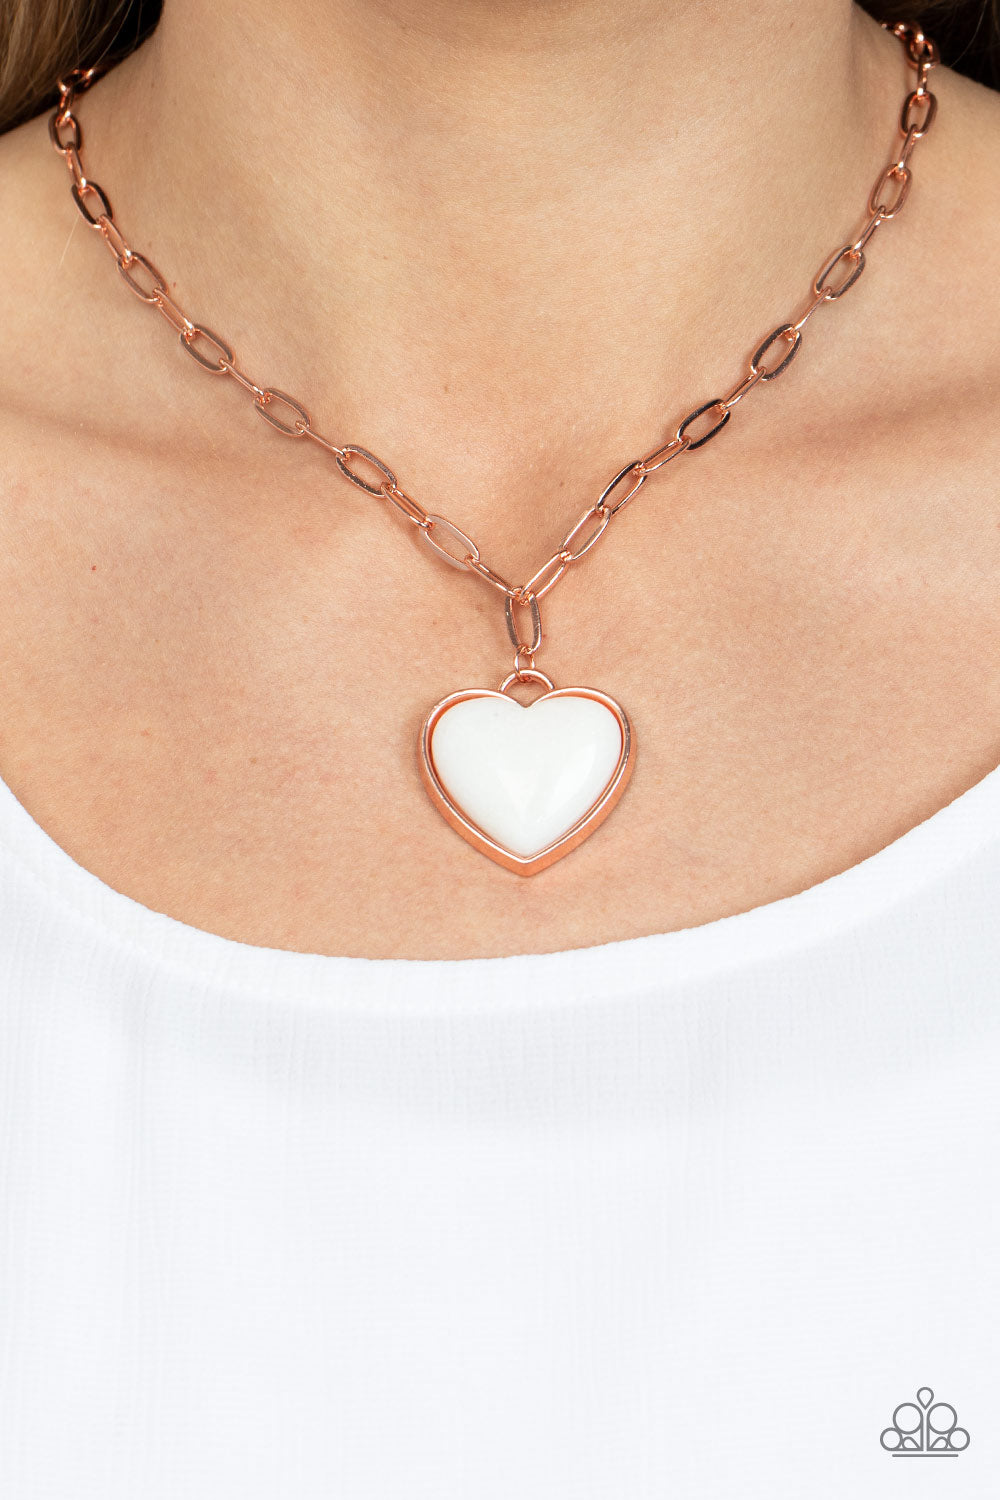 Everlasting Endearment Copper Necklace - Paparazzi Accessories  Chiseled into a charming heart, a quartz-like gemstone is pressed into the center of a shiny copper fitting at the bottom of a shiny copper chain for a sentimental statement. Features an adjustable clasp closure.  Sold as one individual necklace. Includes one pair of matching earrings.